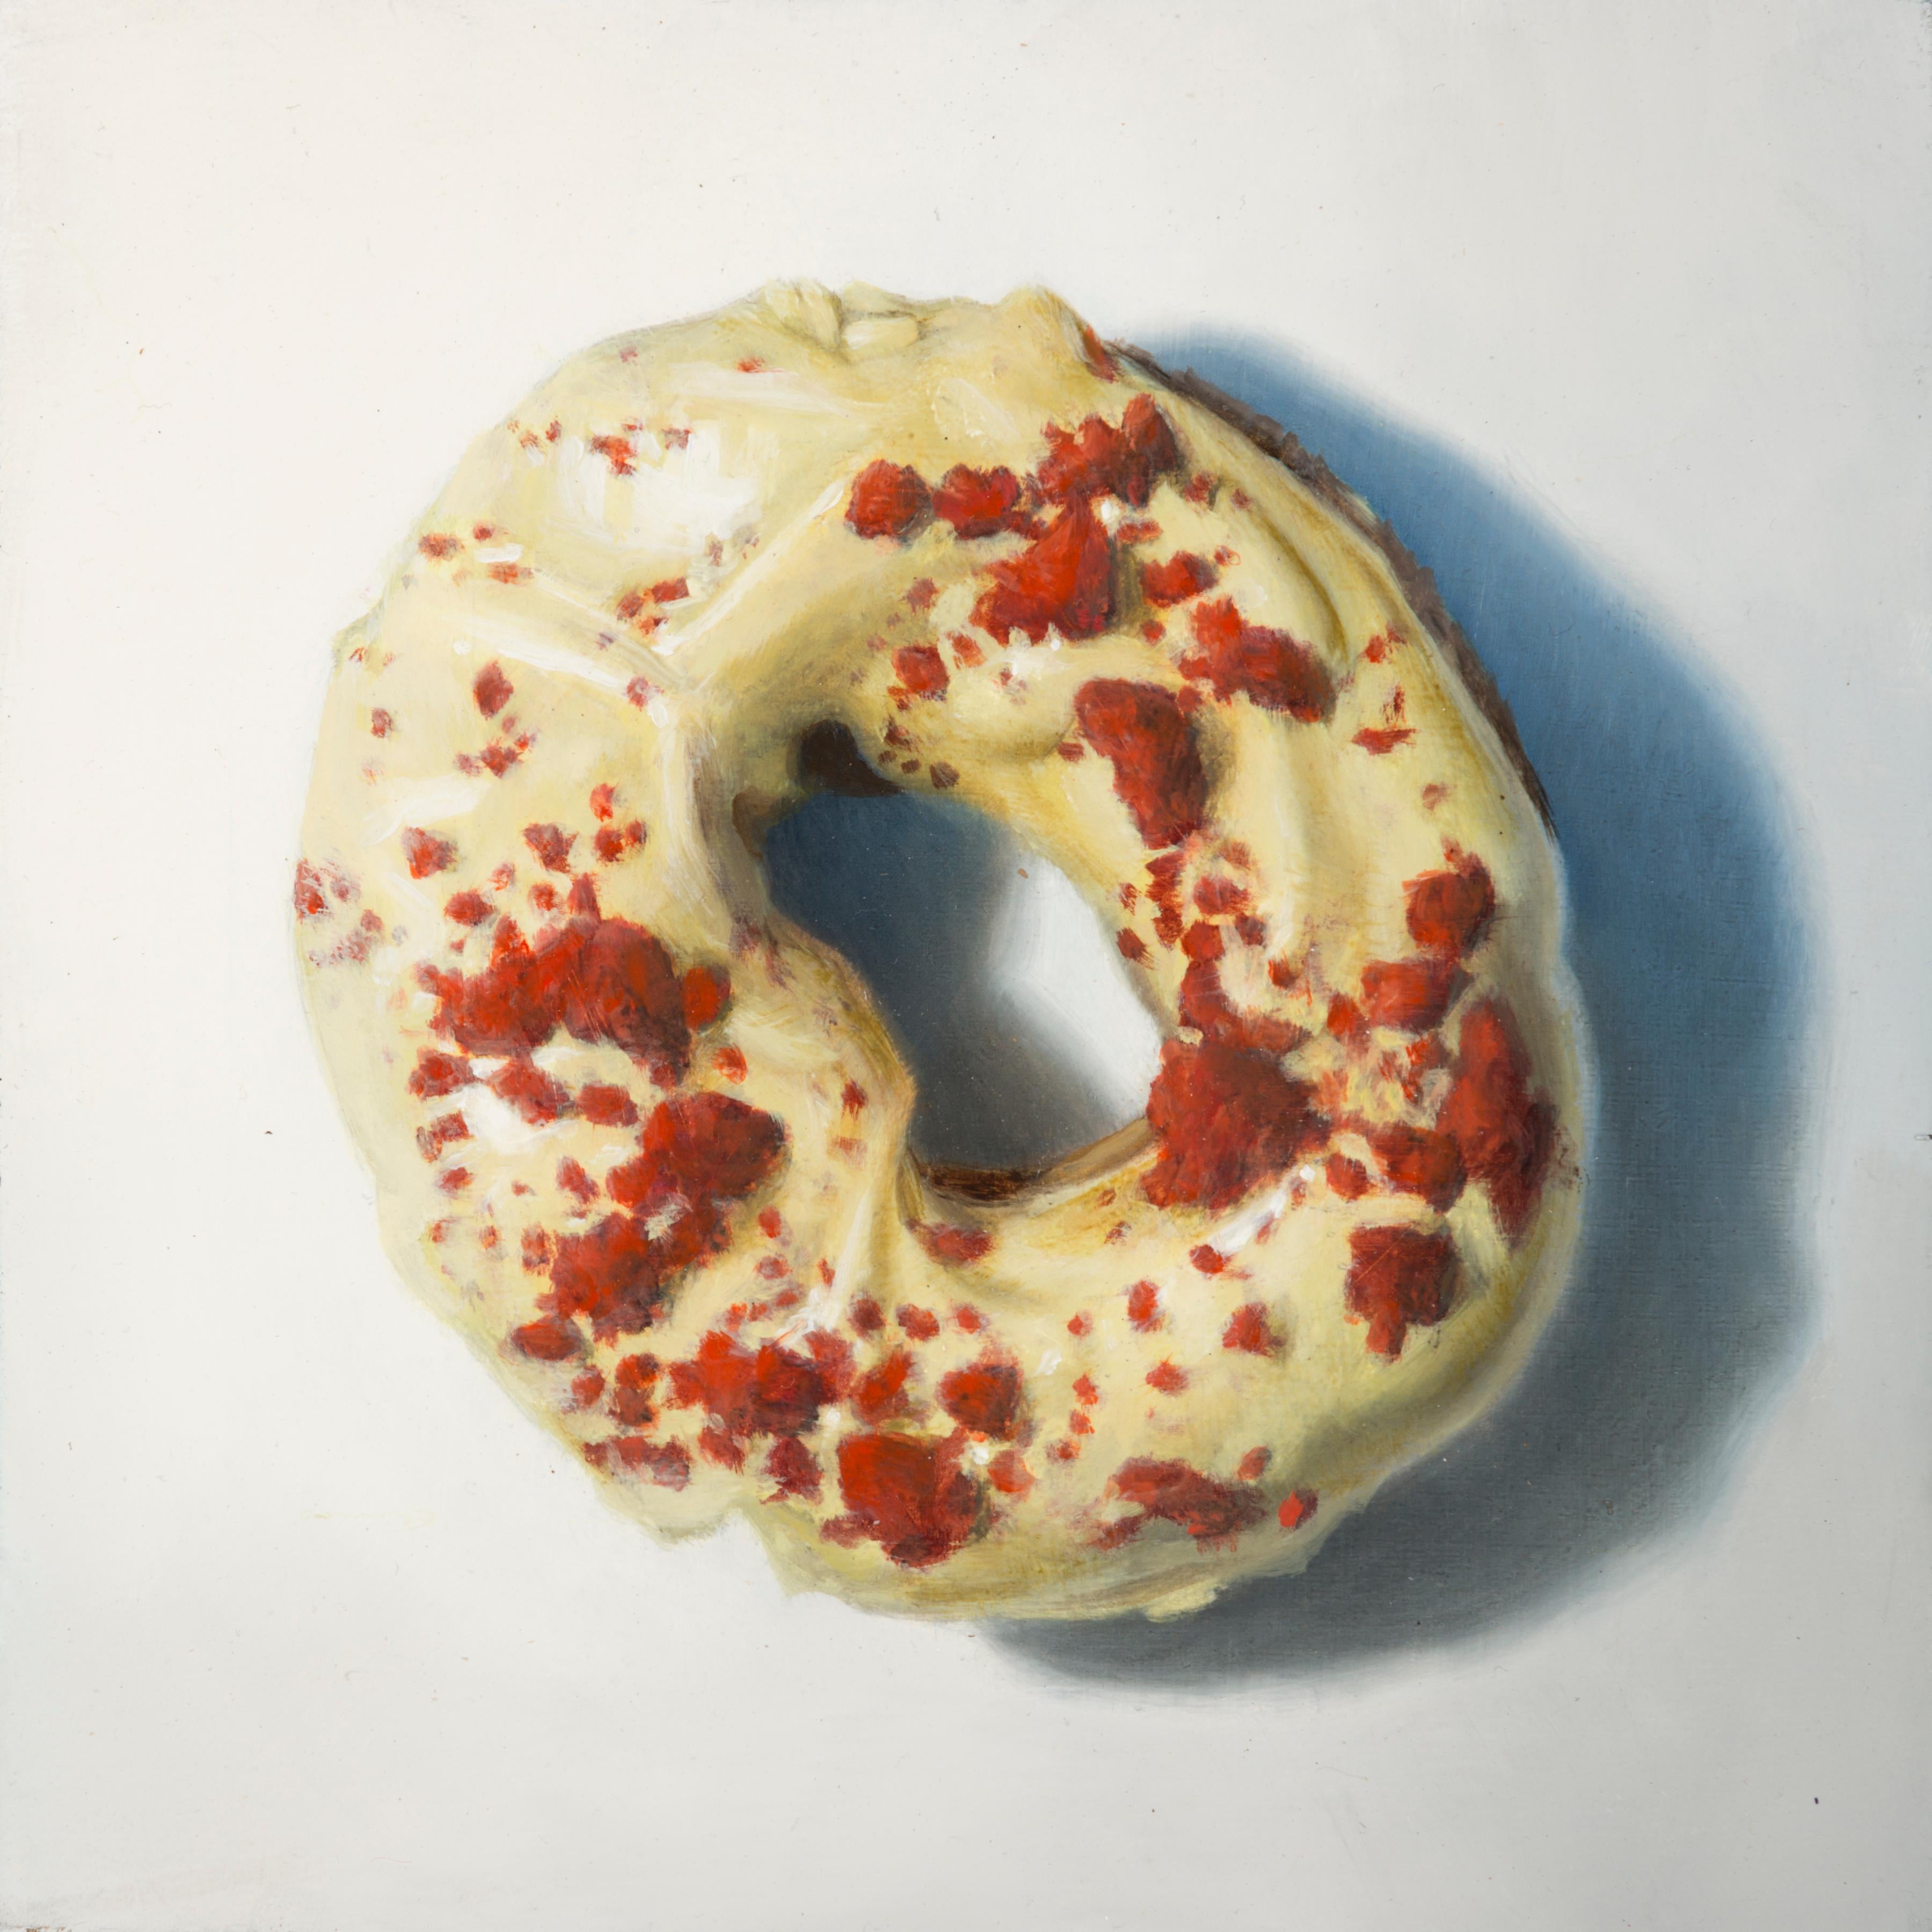 Gregory Block Figurative Painting - "Iced Red Velvet" Oil Painting